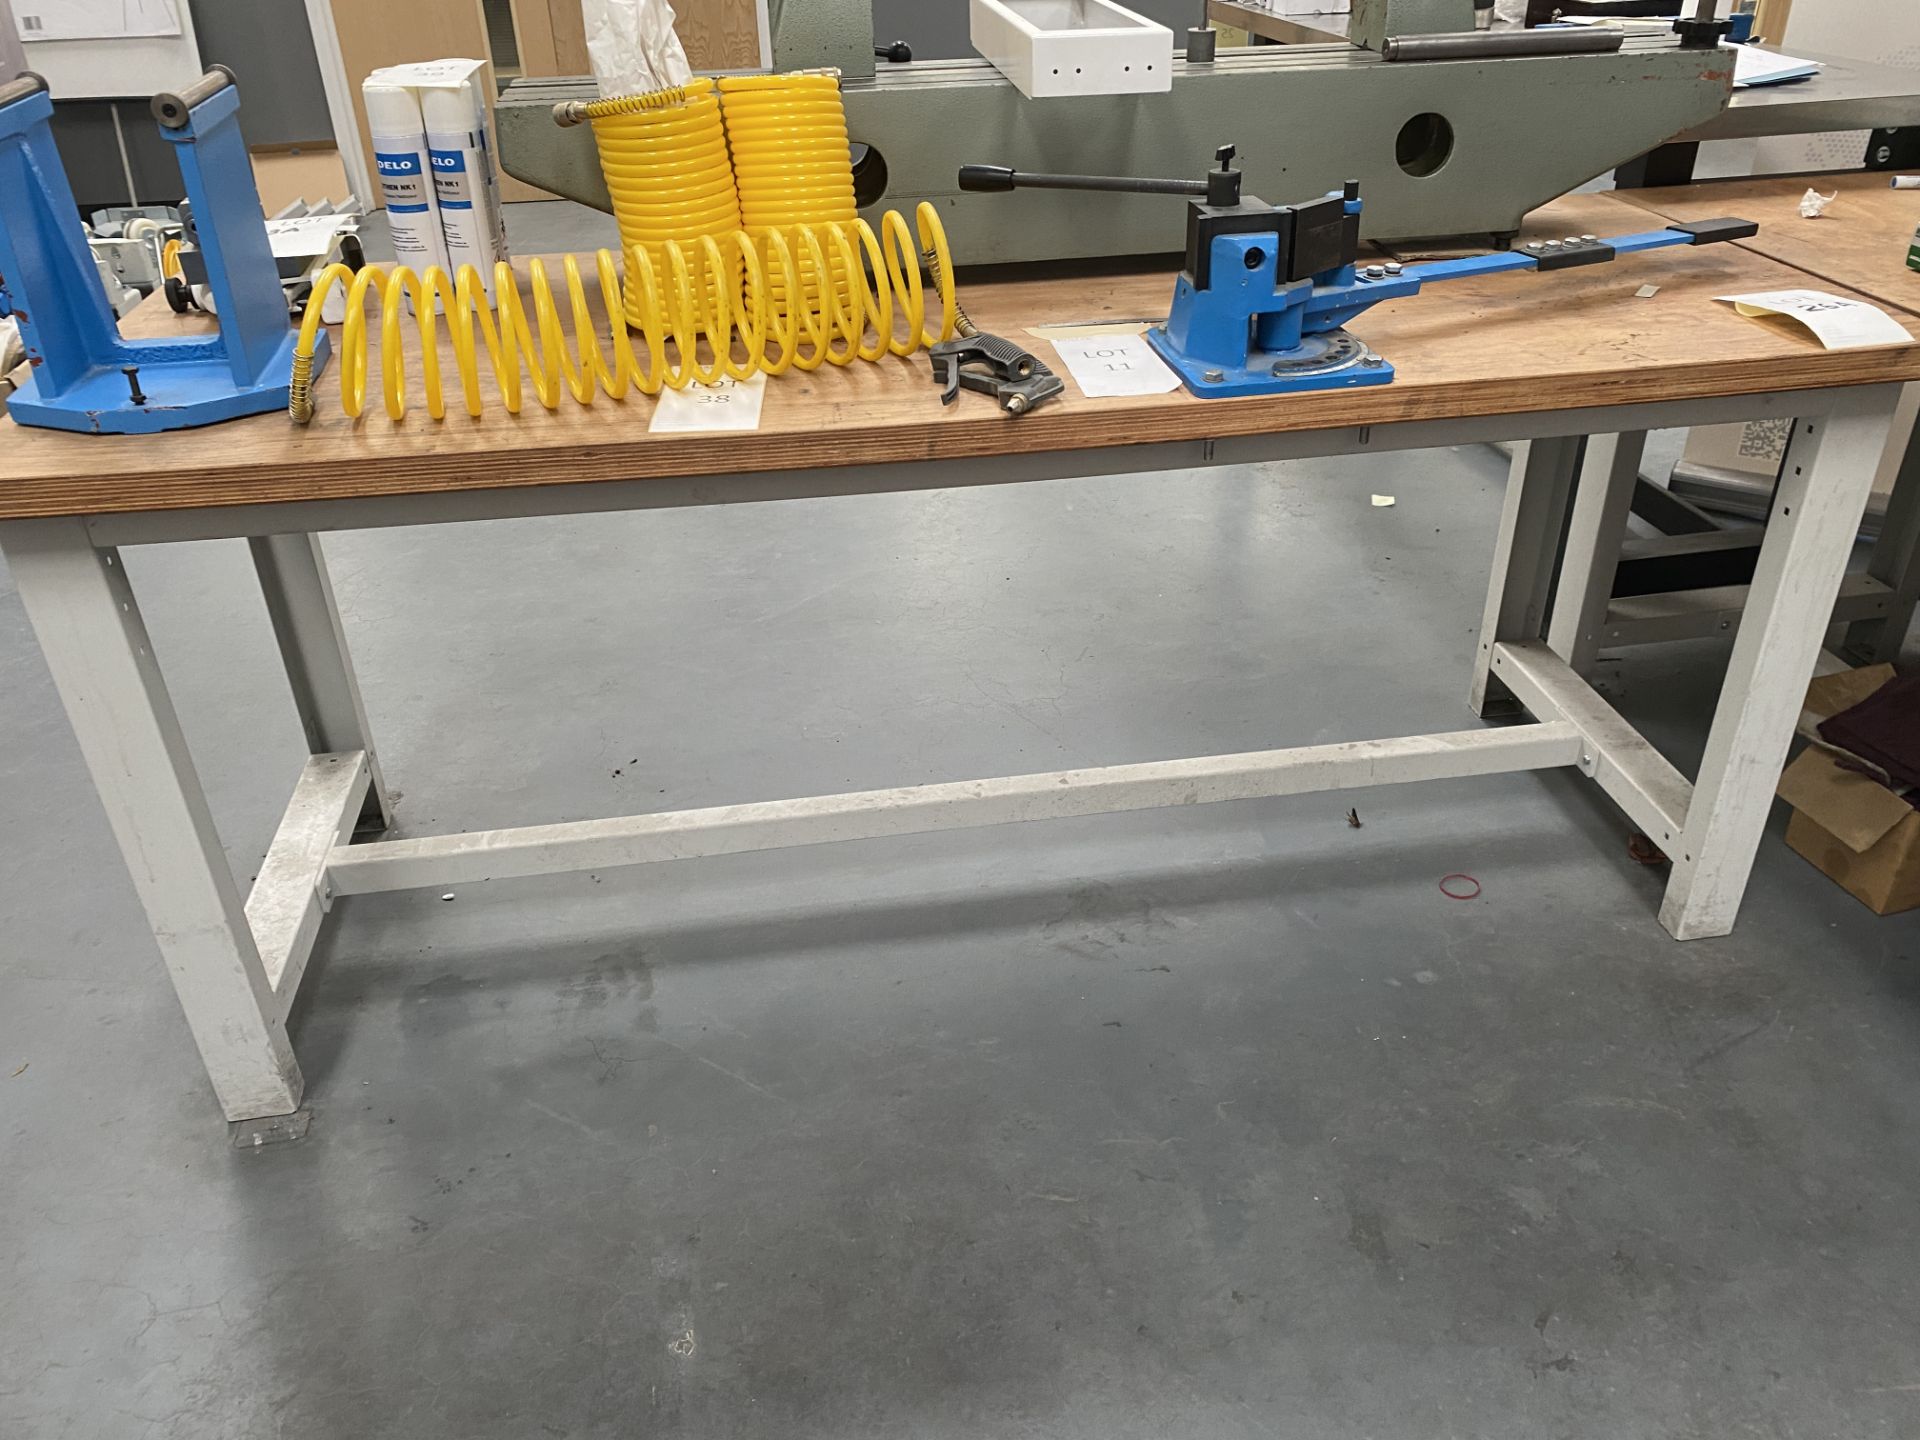 Workbench Size 2m X 0.76m X 0.84m (Does Not Include Contents)